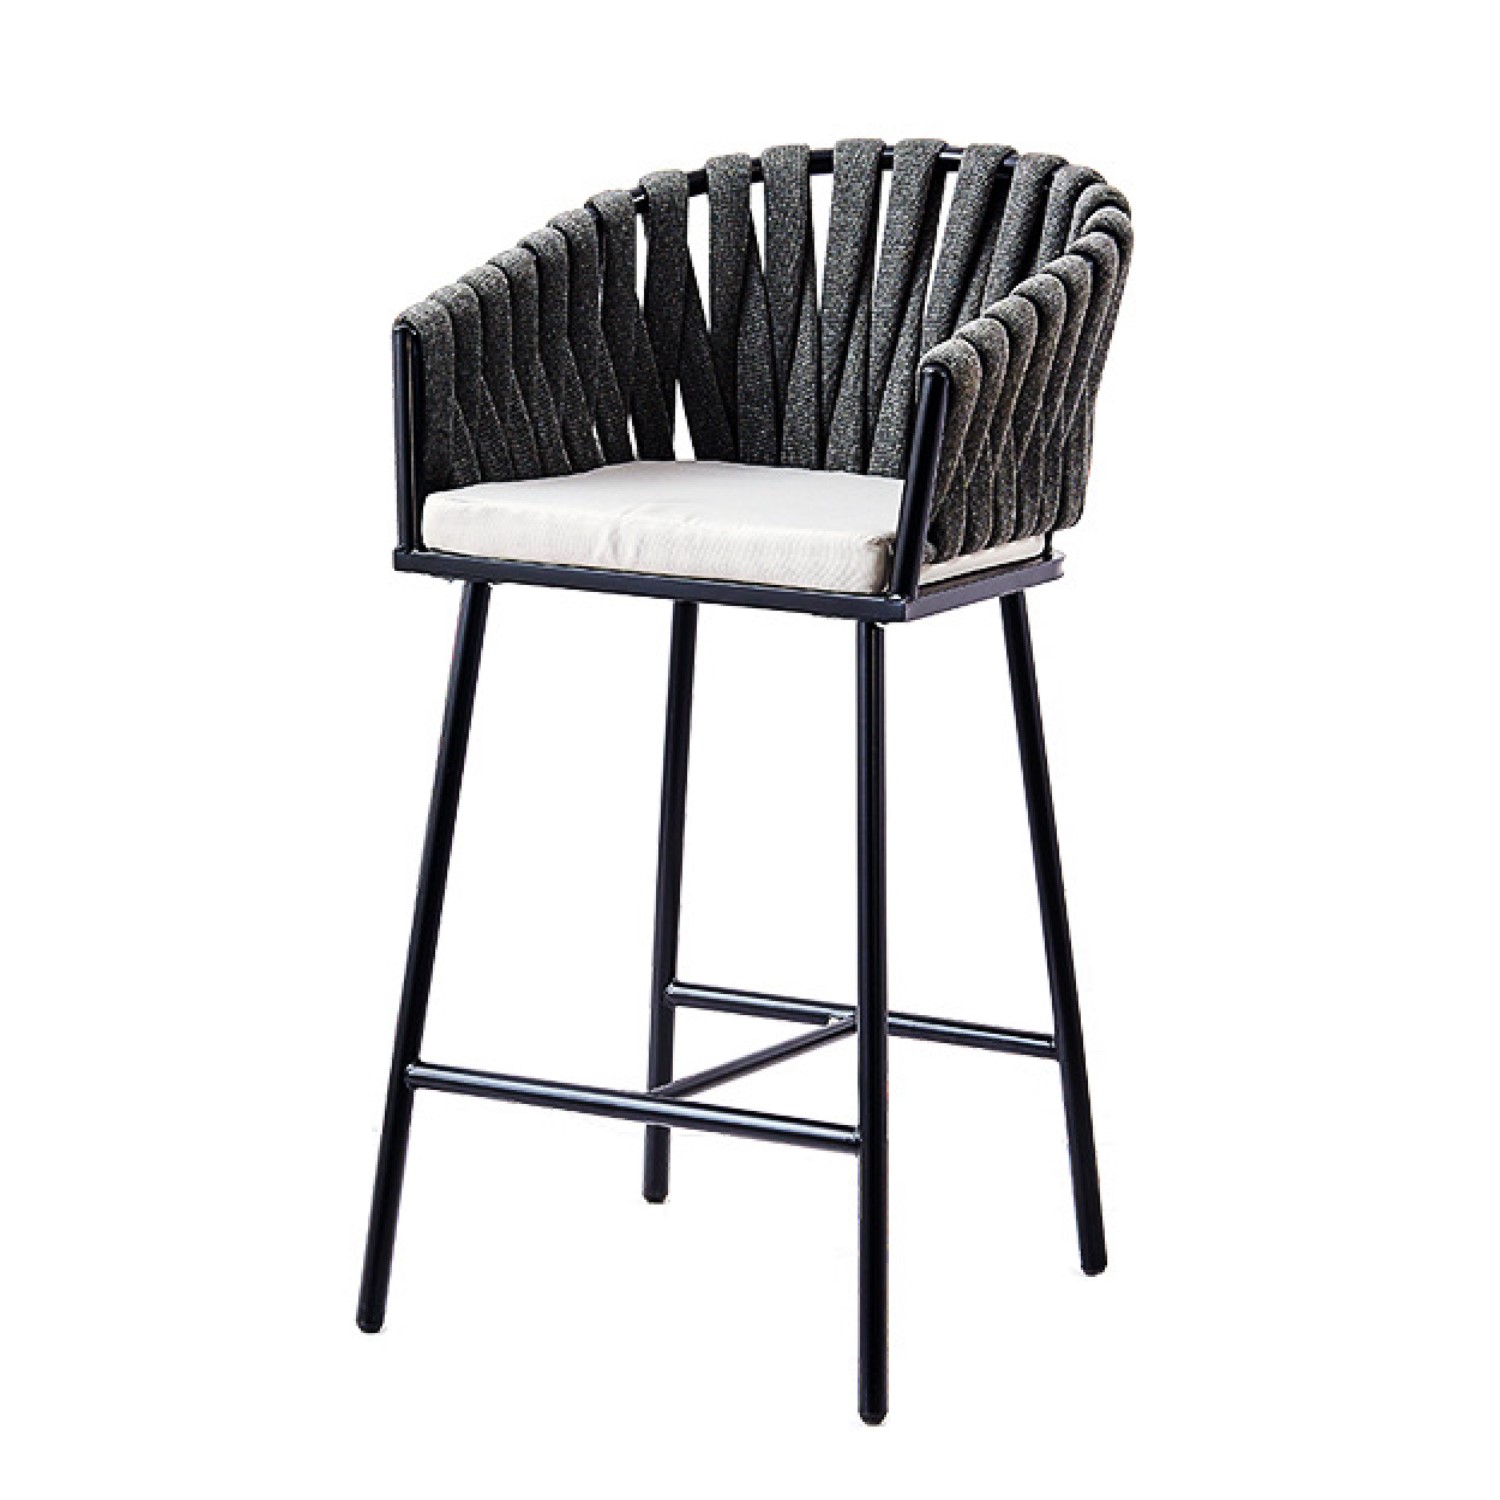 BR006 Patio Bar Stools Set for 2 